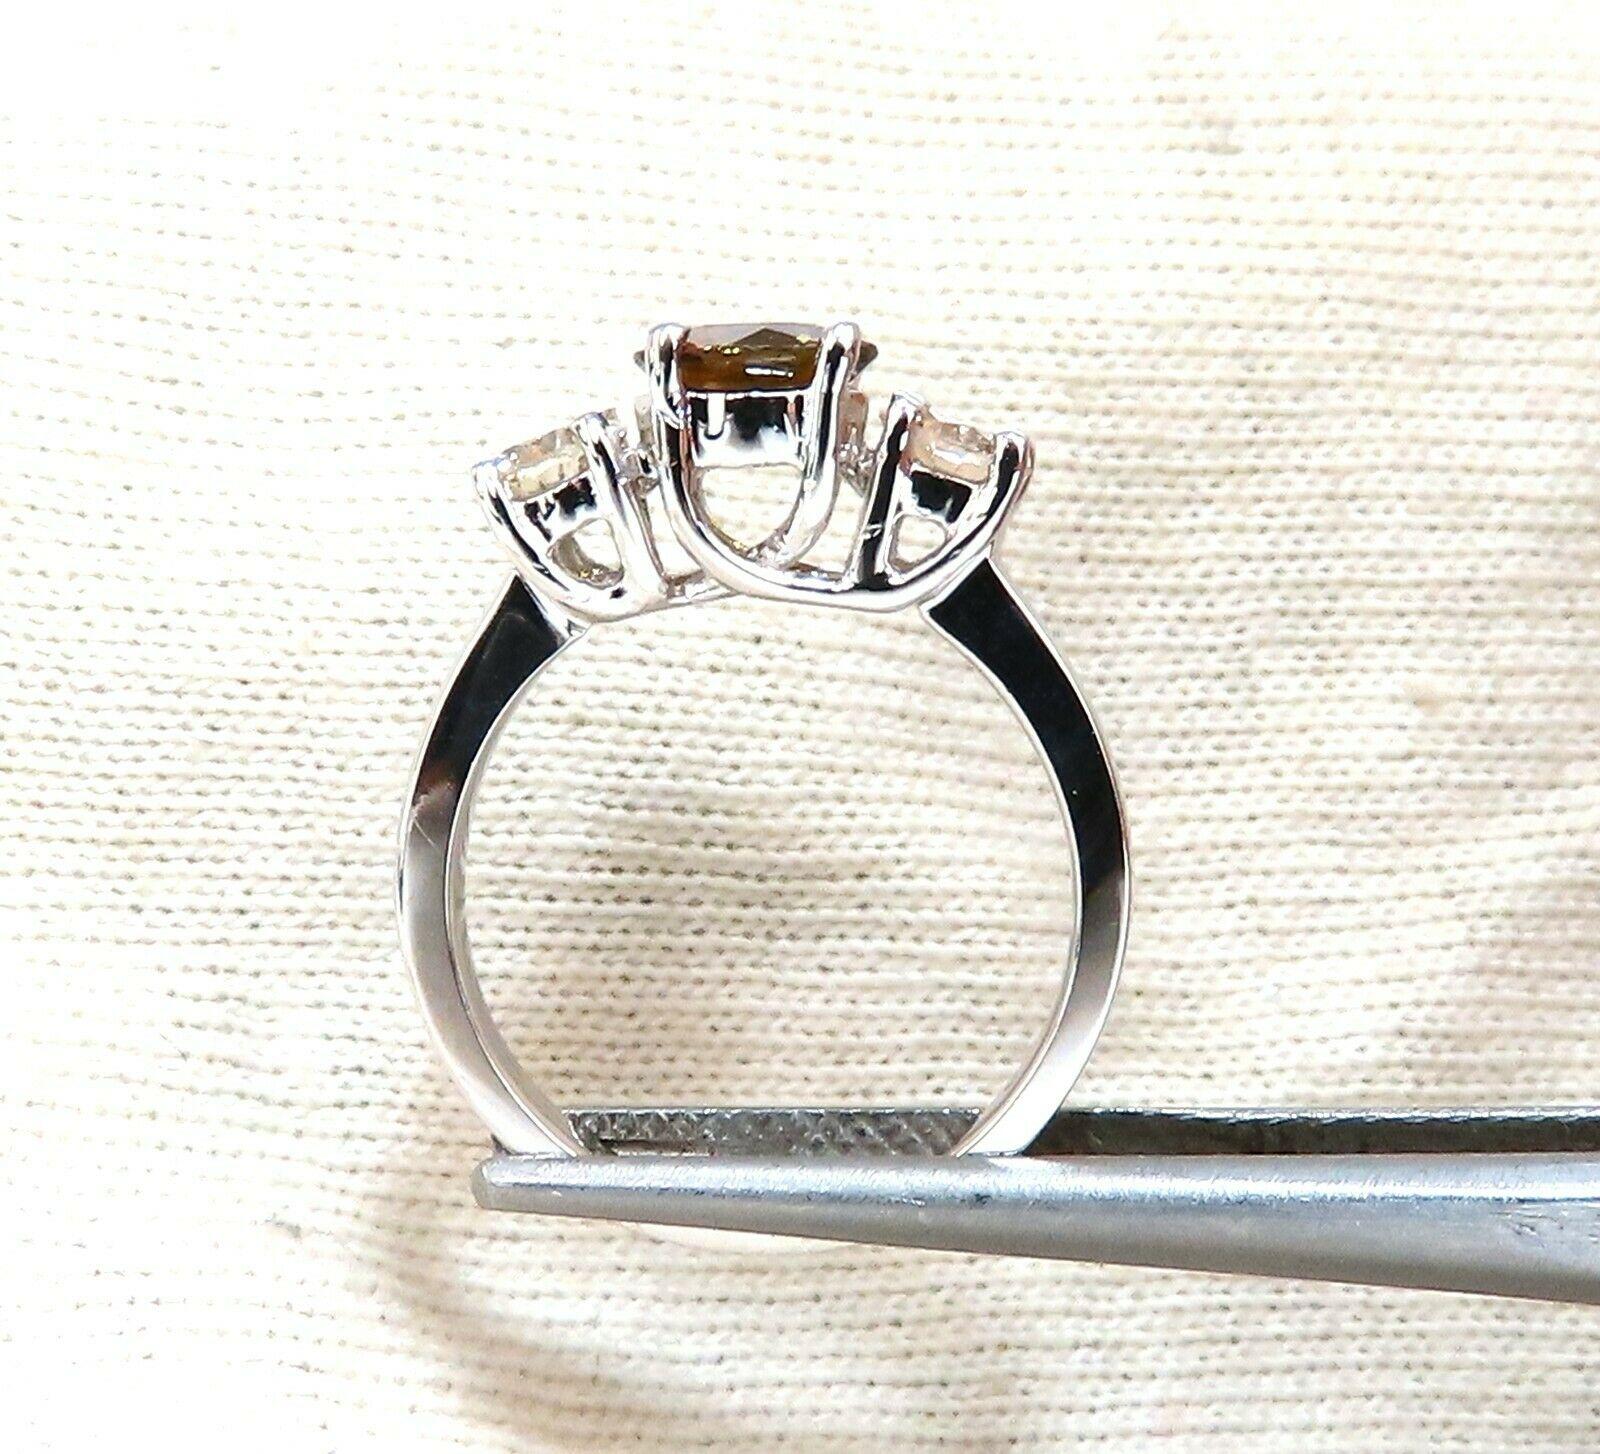 Classic Diamonds & Sapphire, Three Stone Ring

1.30ct Round Natural Fancy Yellow Orange Brown Sapphire

Vibrant Vivid Cognac Color

Full cut and Full Faceted.

6.7mm diameter

1.00ct. Round Cut diamond

Full Cut Brilliant

Fancy Light Brown 

Si-2